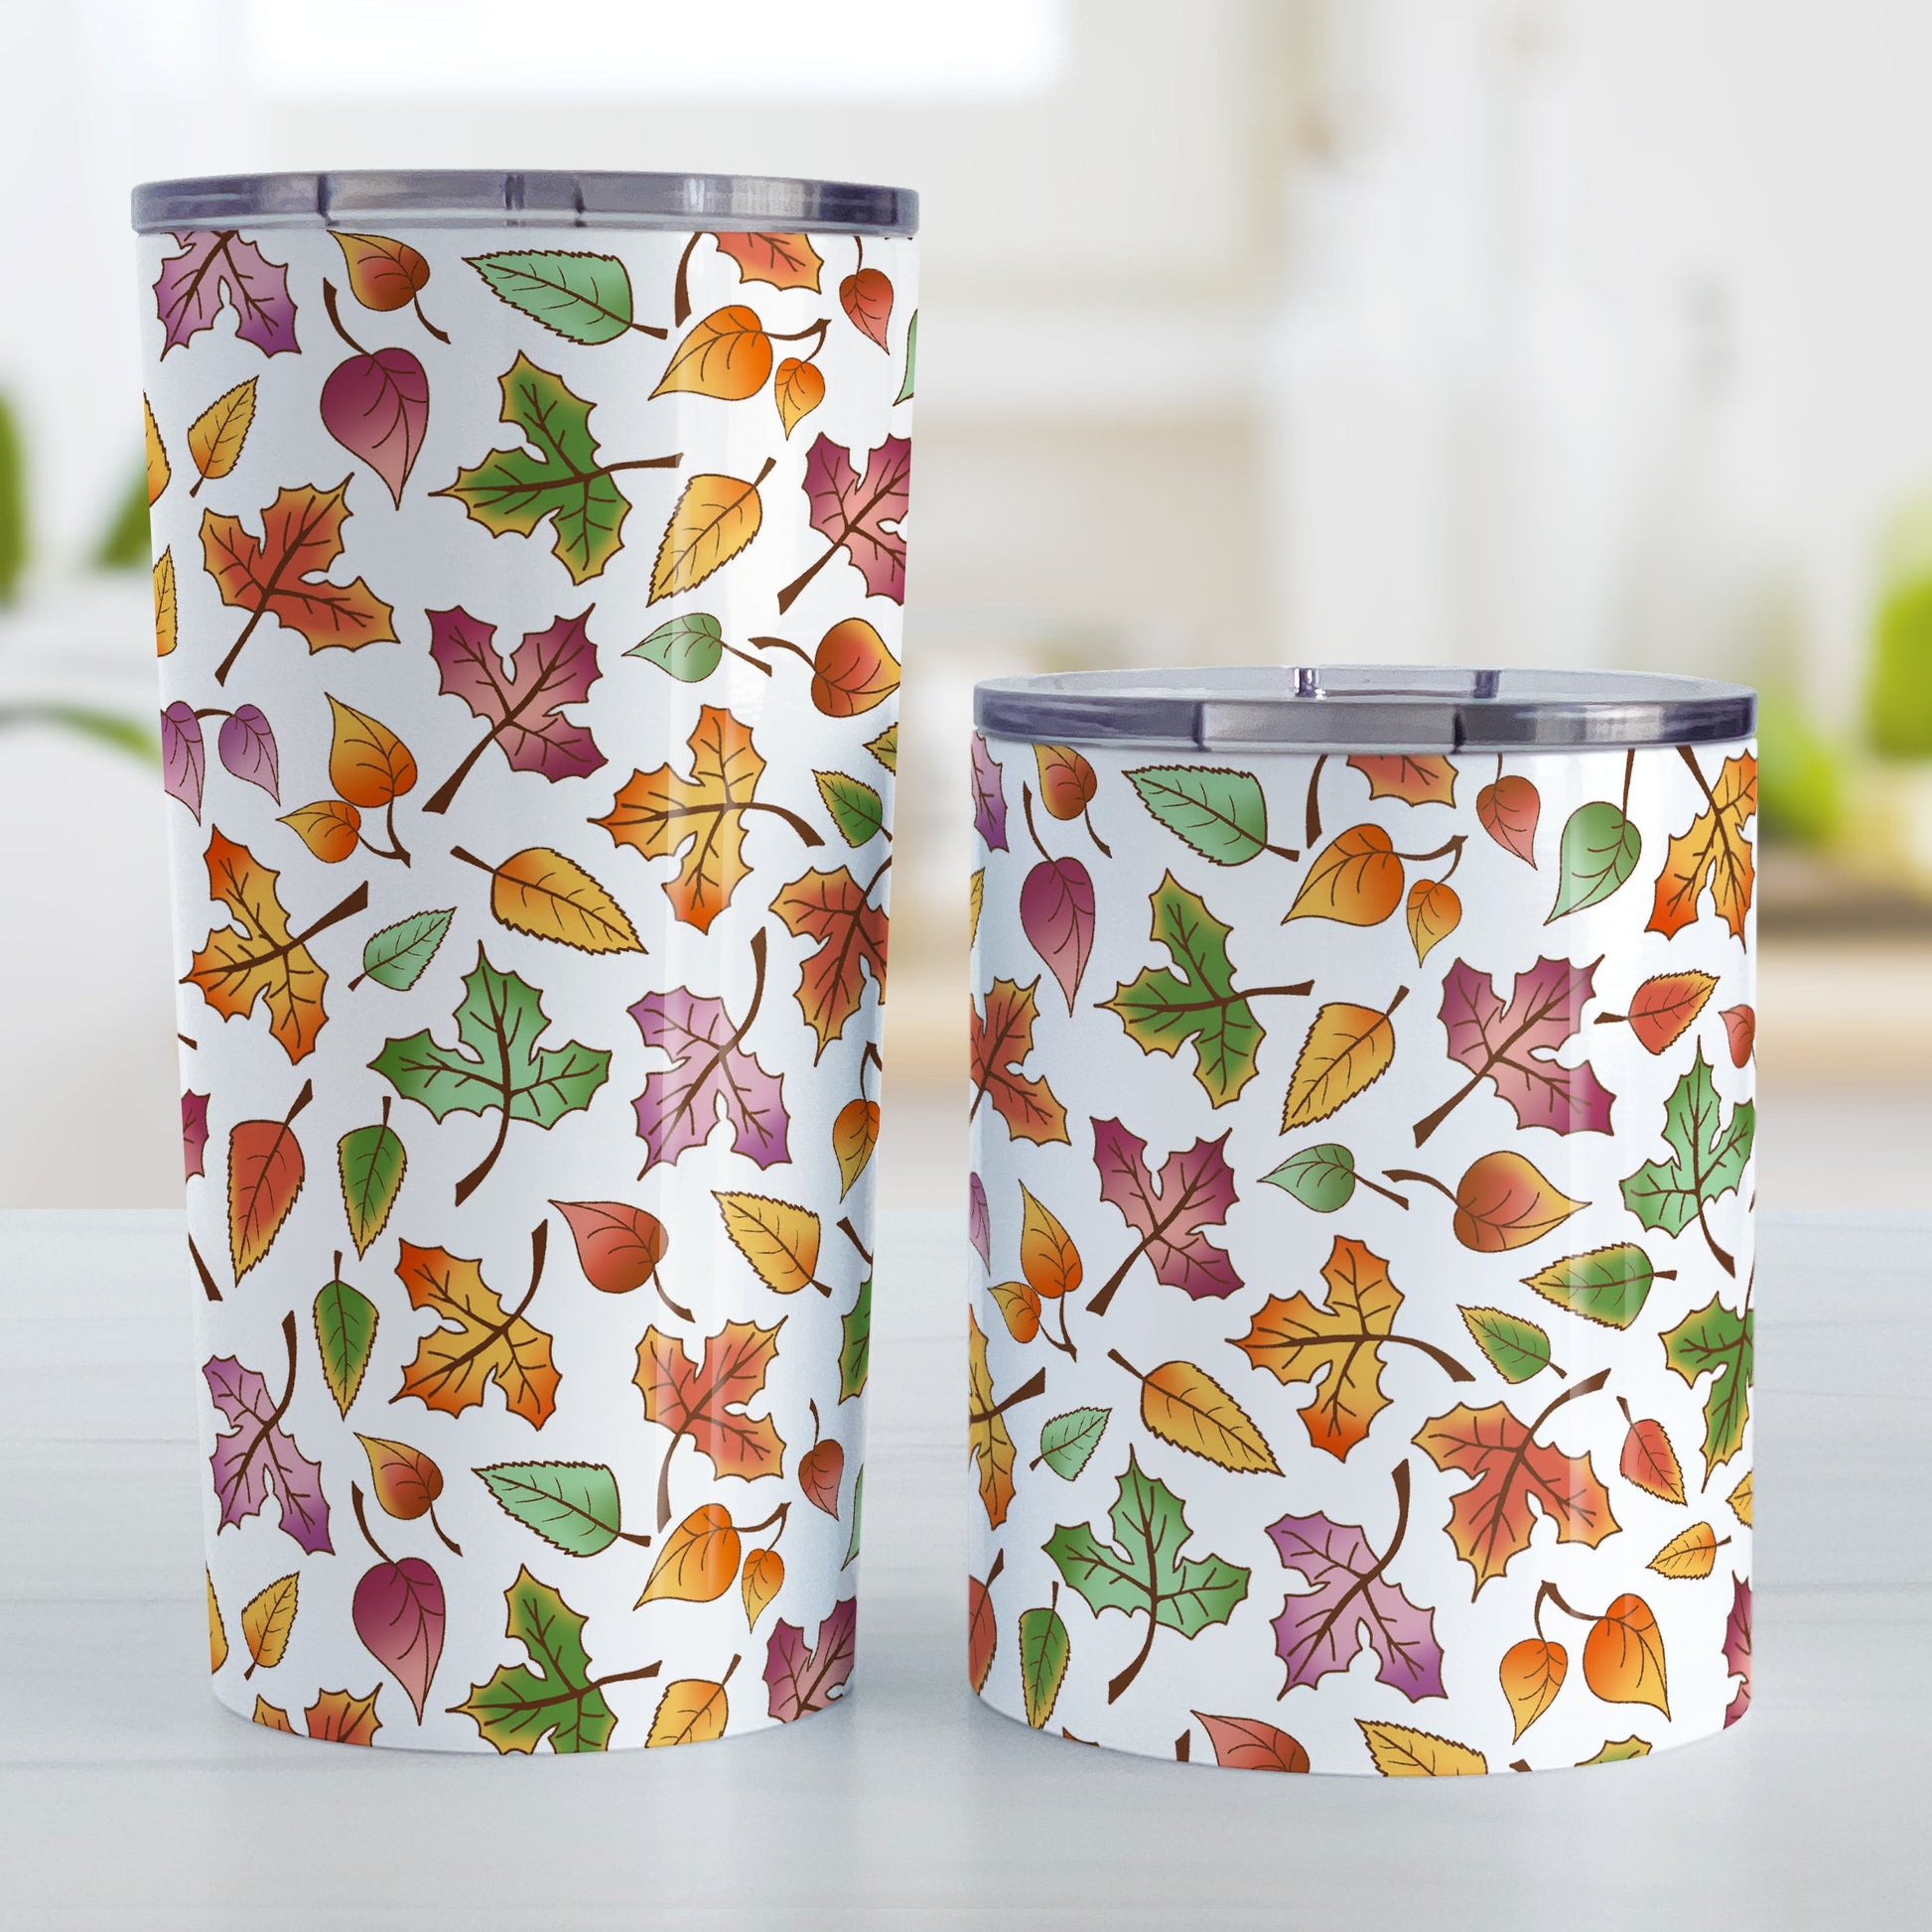 Changing Leaves Fall Tumbler Cup (20oz and 10oz) at Amy's Coffee Mugs. Stainless steel tumbler cups designed with a fall themed pattern of leaves changing colors, as they do at the beginning of autumn, that wraps around the cups.